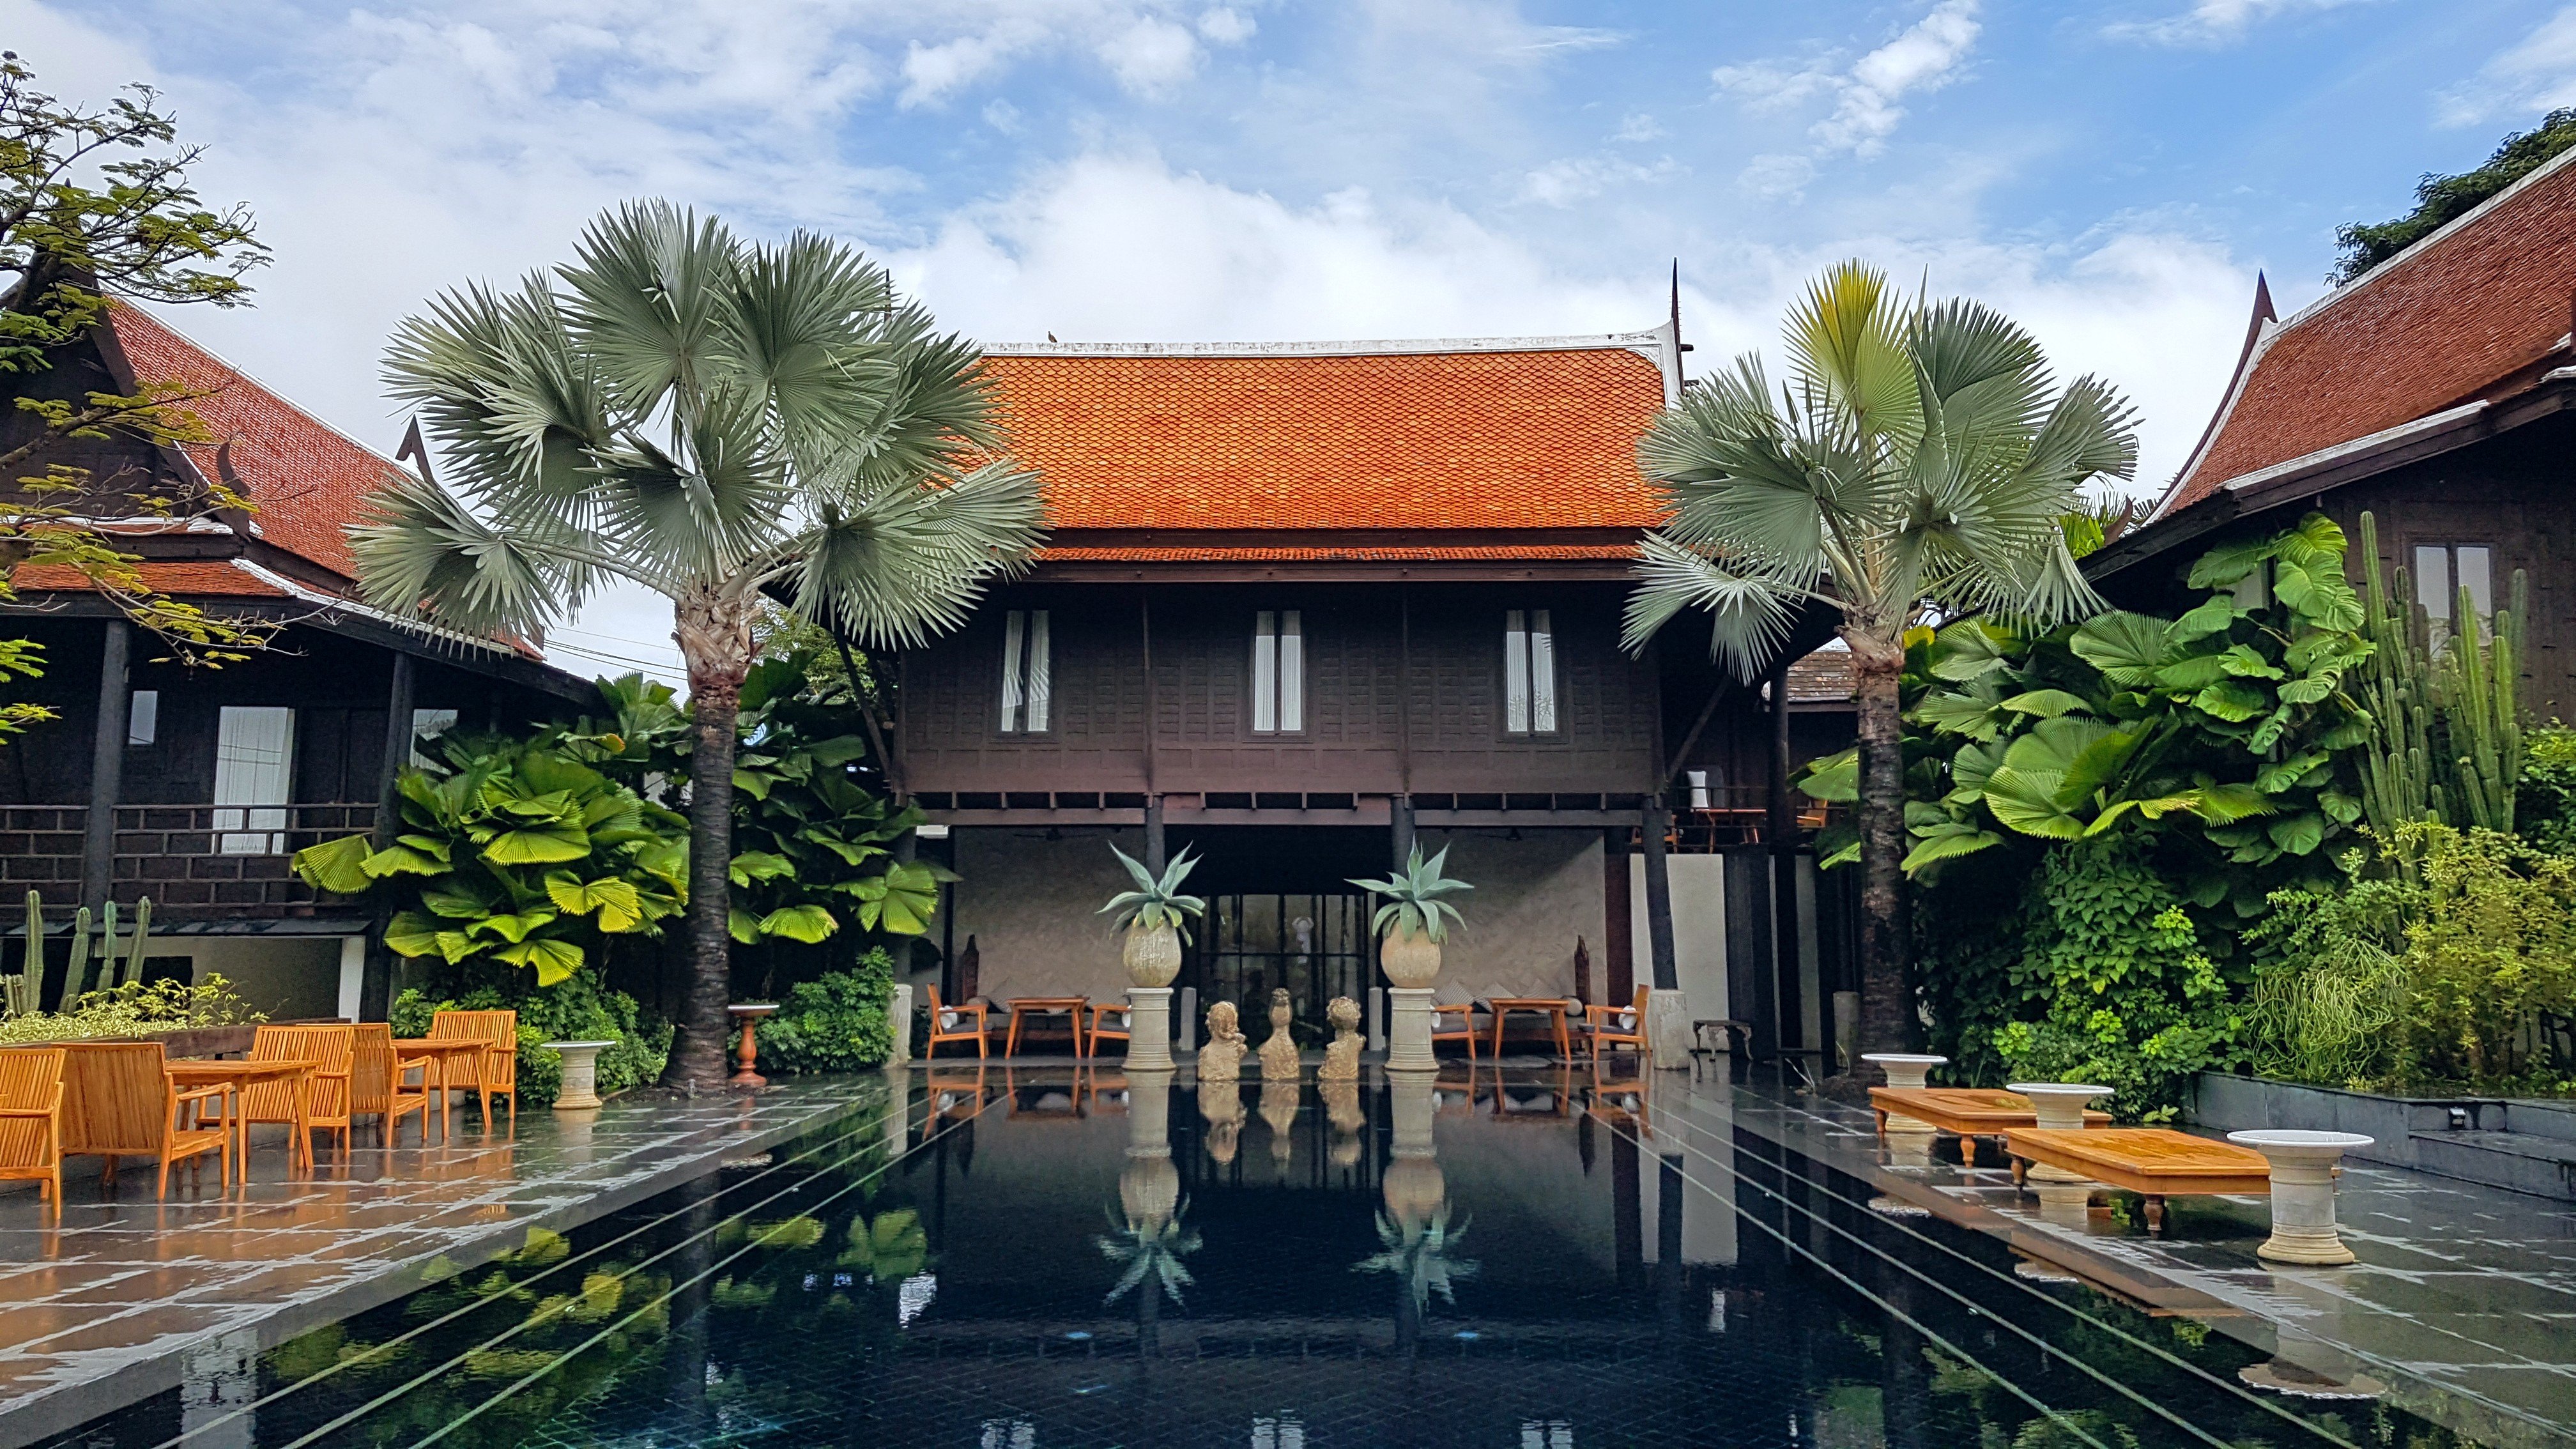 Villa Mahabhirom in Chiang Mai is a splendid patchwork of restored antique wooden houses acquired from remote Thai provinces. Photos: Cedric Tan